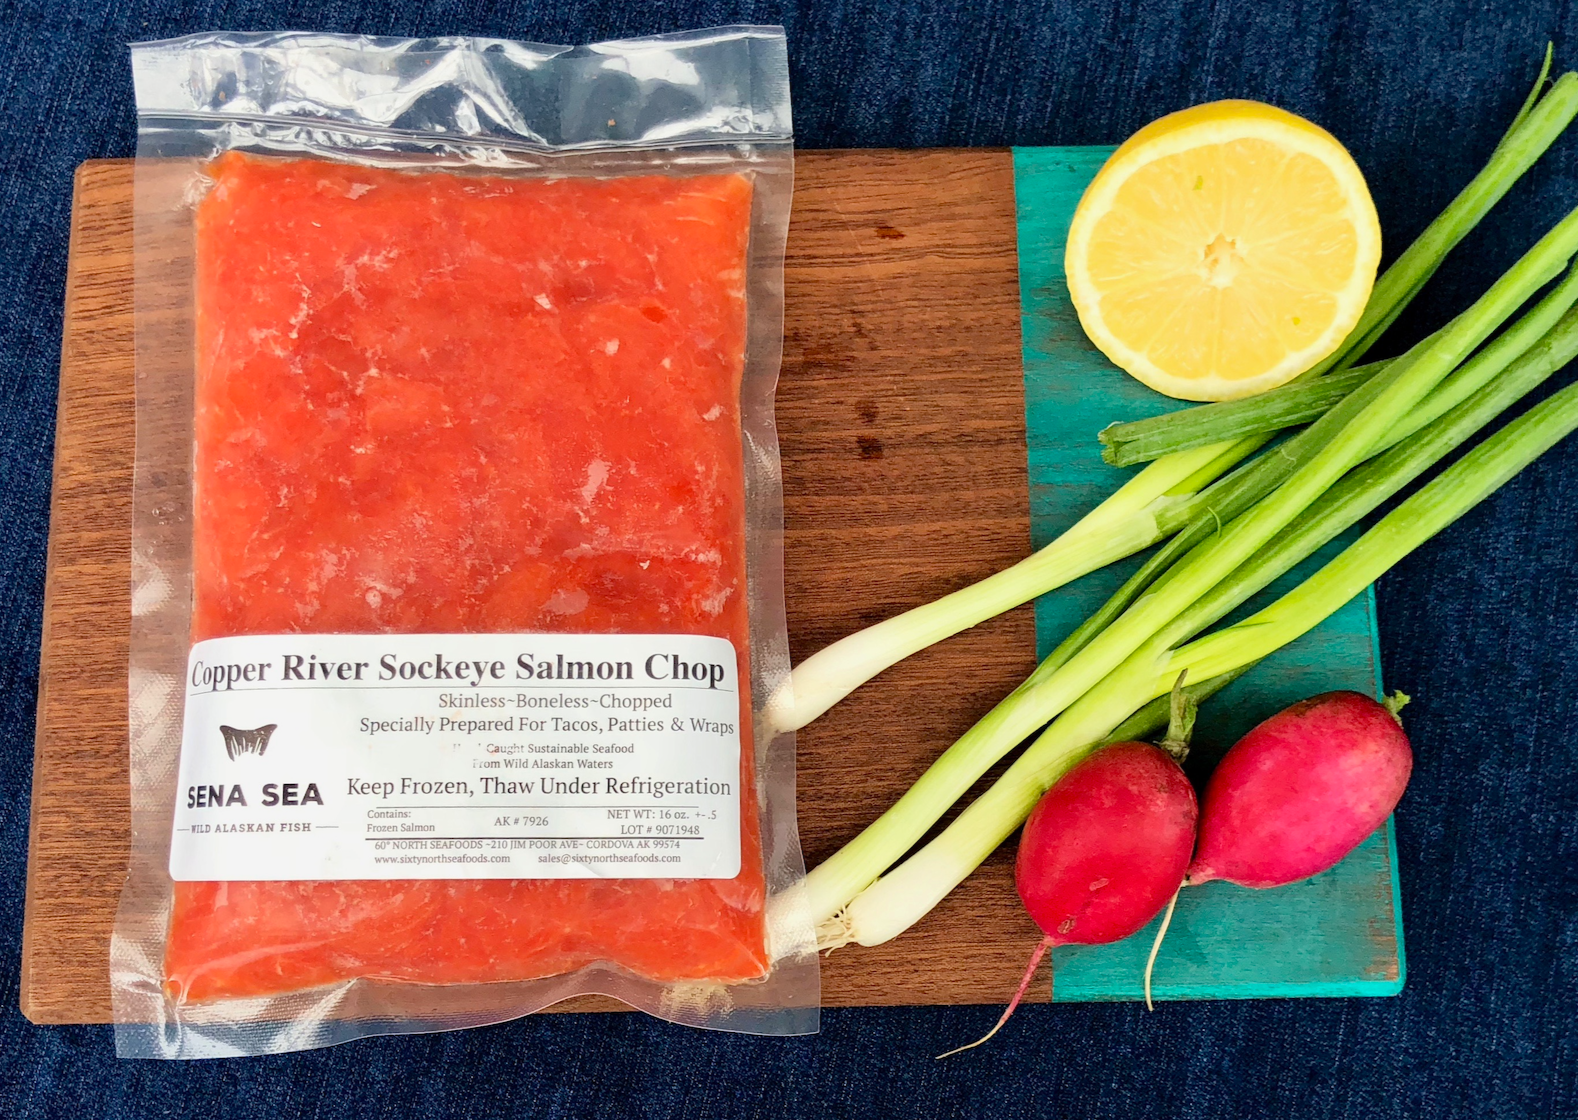 Wild caught packaged copper river sockeye salmon chop